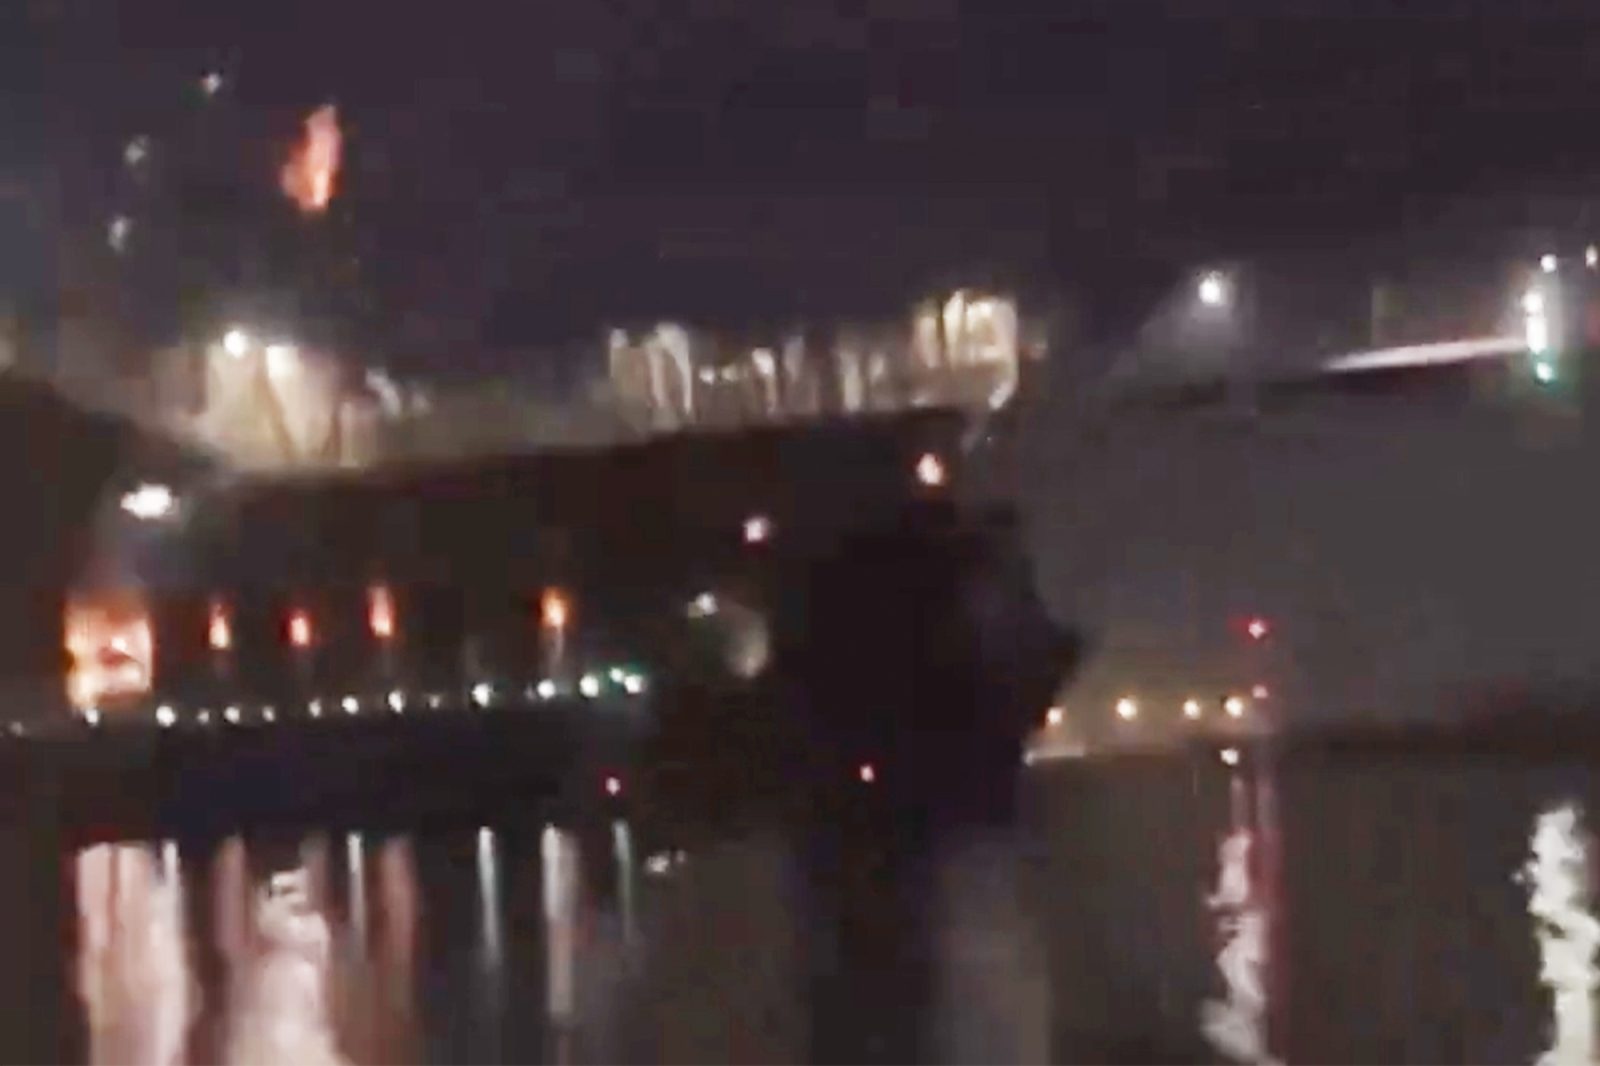 Baltimore’s Francis Scott Key Bridge collapses after being struck by ship, ‘mass casualty event’ declared